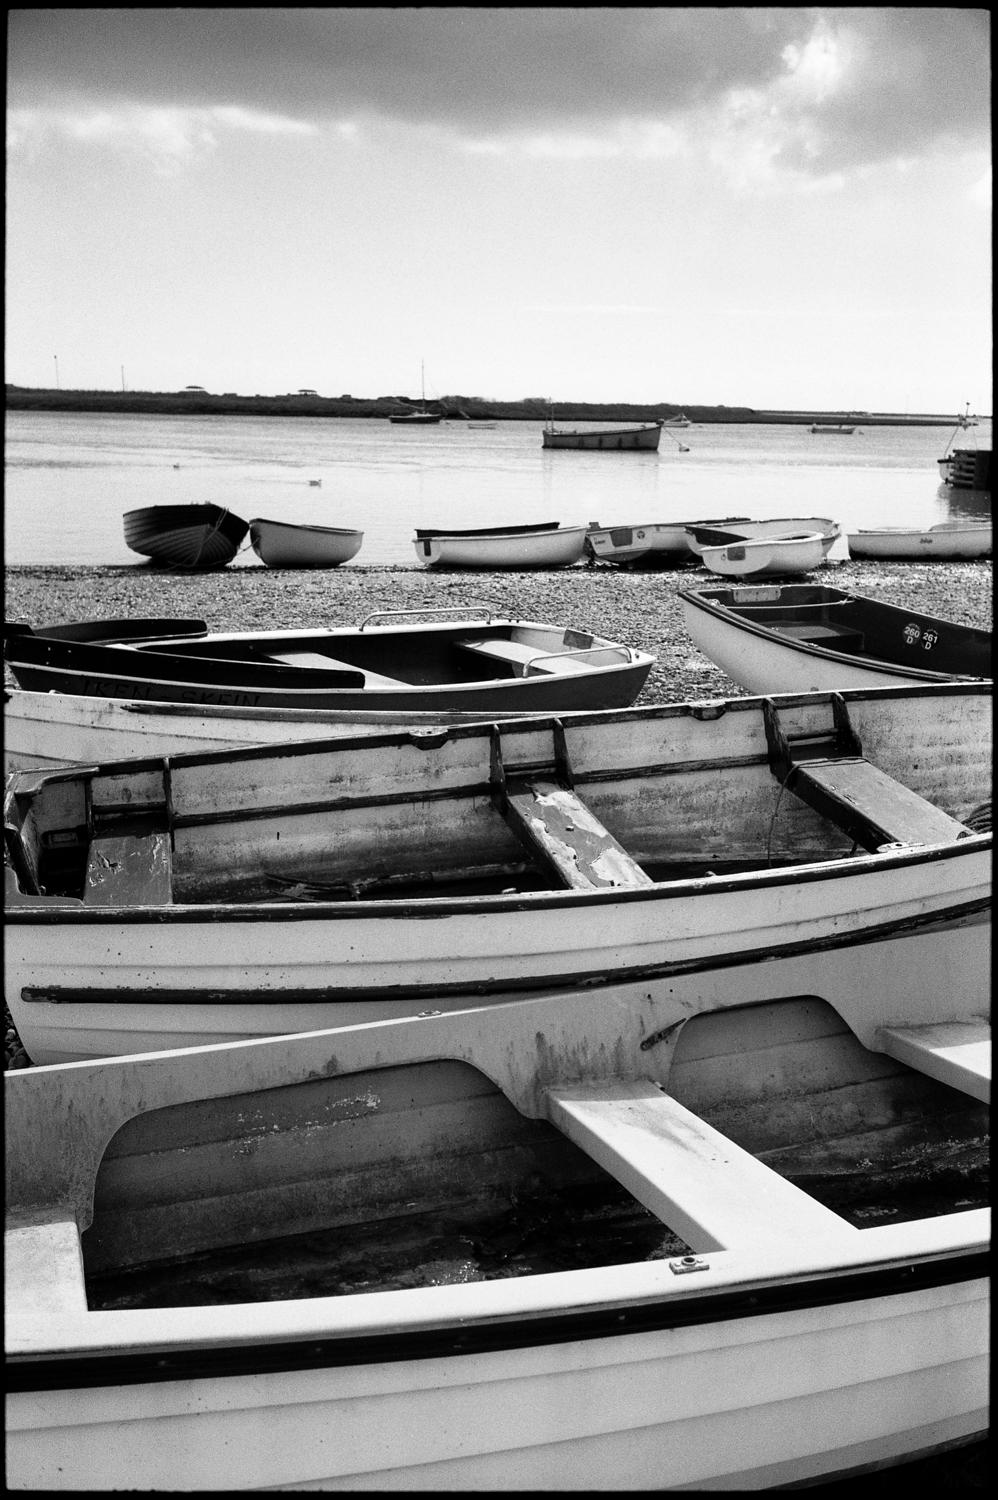 [Featured in Italian Vogue. The print will not display the watermark]

Edition 3/10 - Boats, Orford Ness, Suffolk, Silver Gelatin Photograph

Edition of 10 + 5 APs. Signature and edition number on bottom front border with artists blind